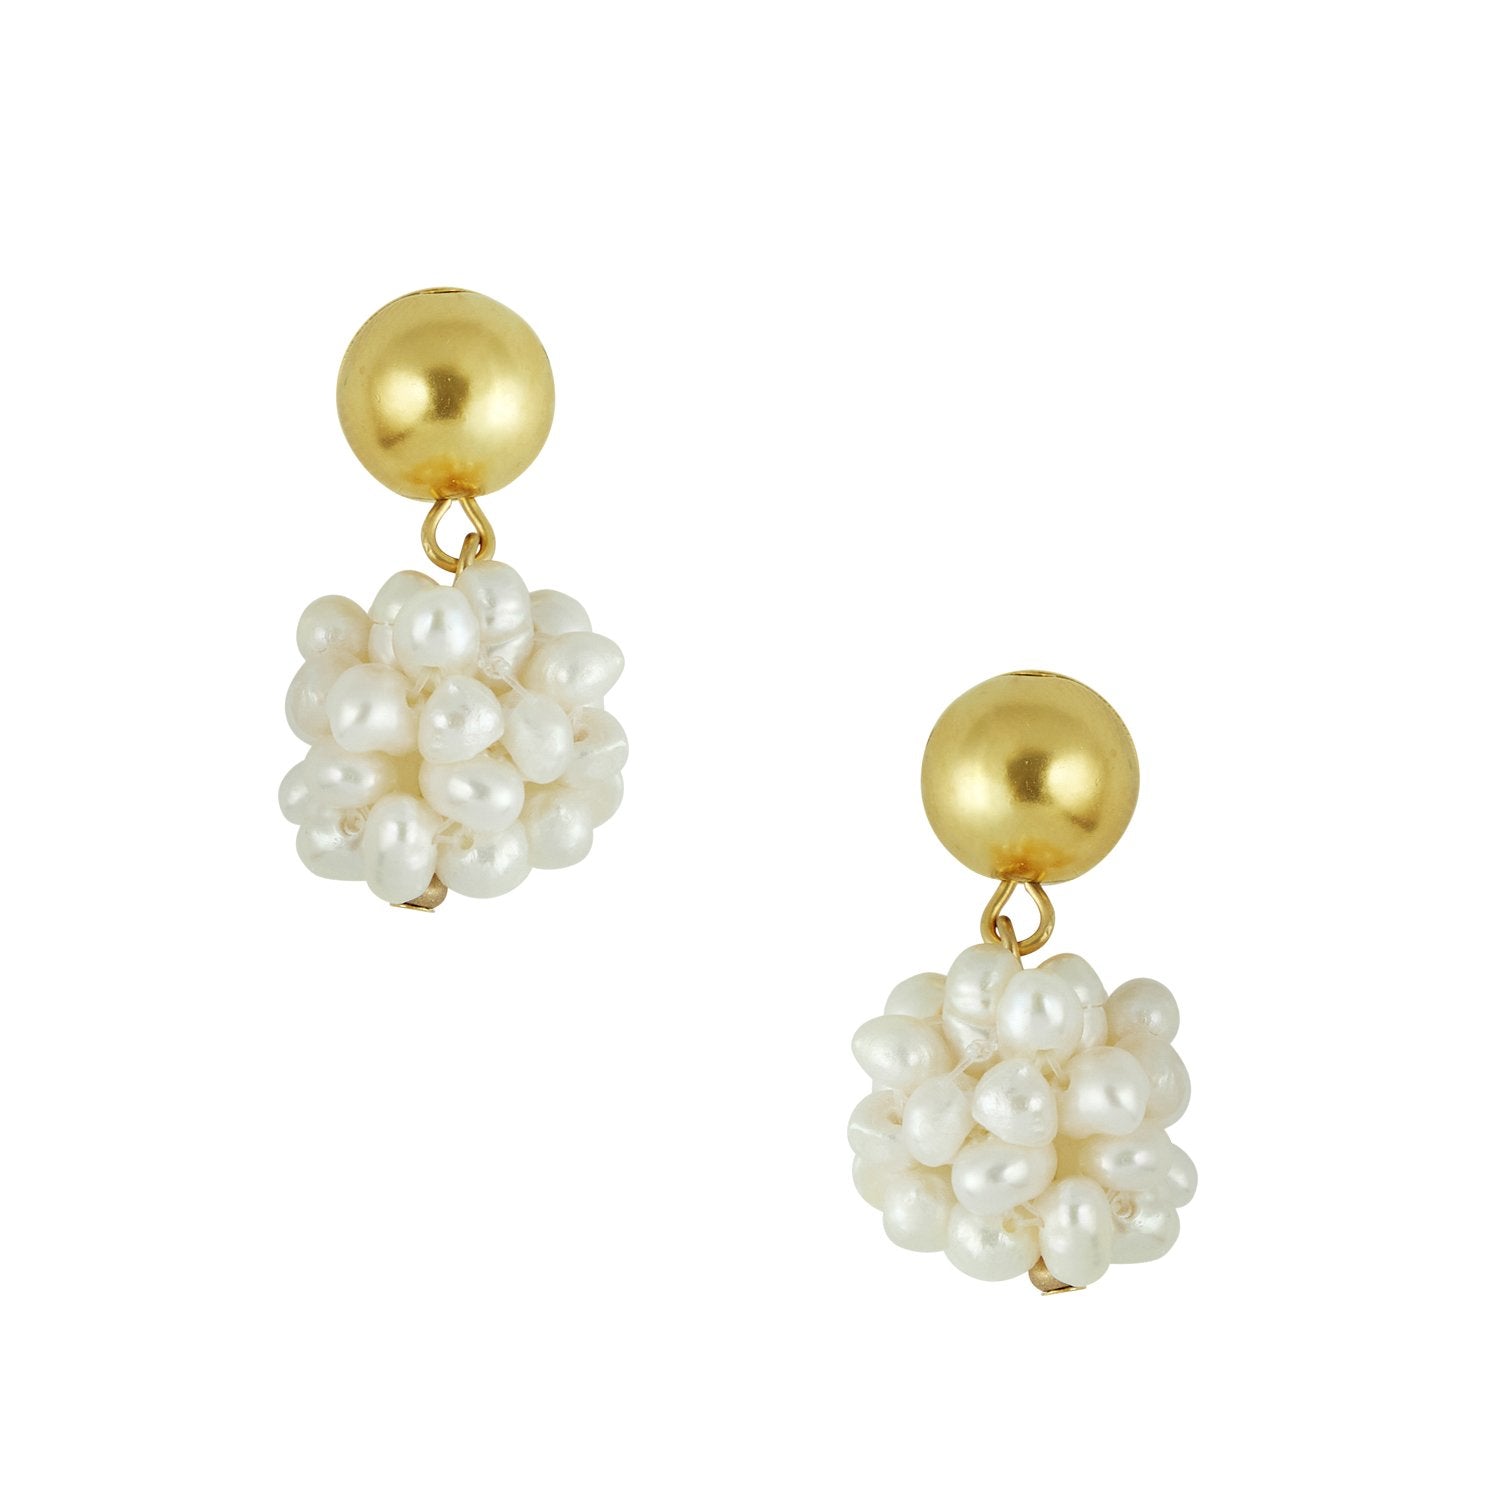 Shop the Look - Pearl Clusters